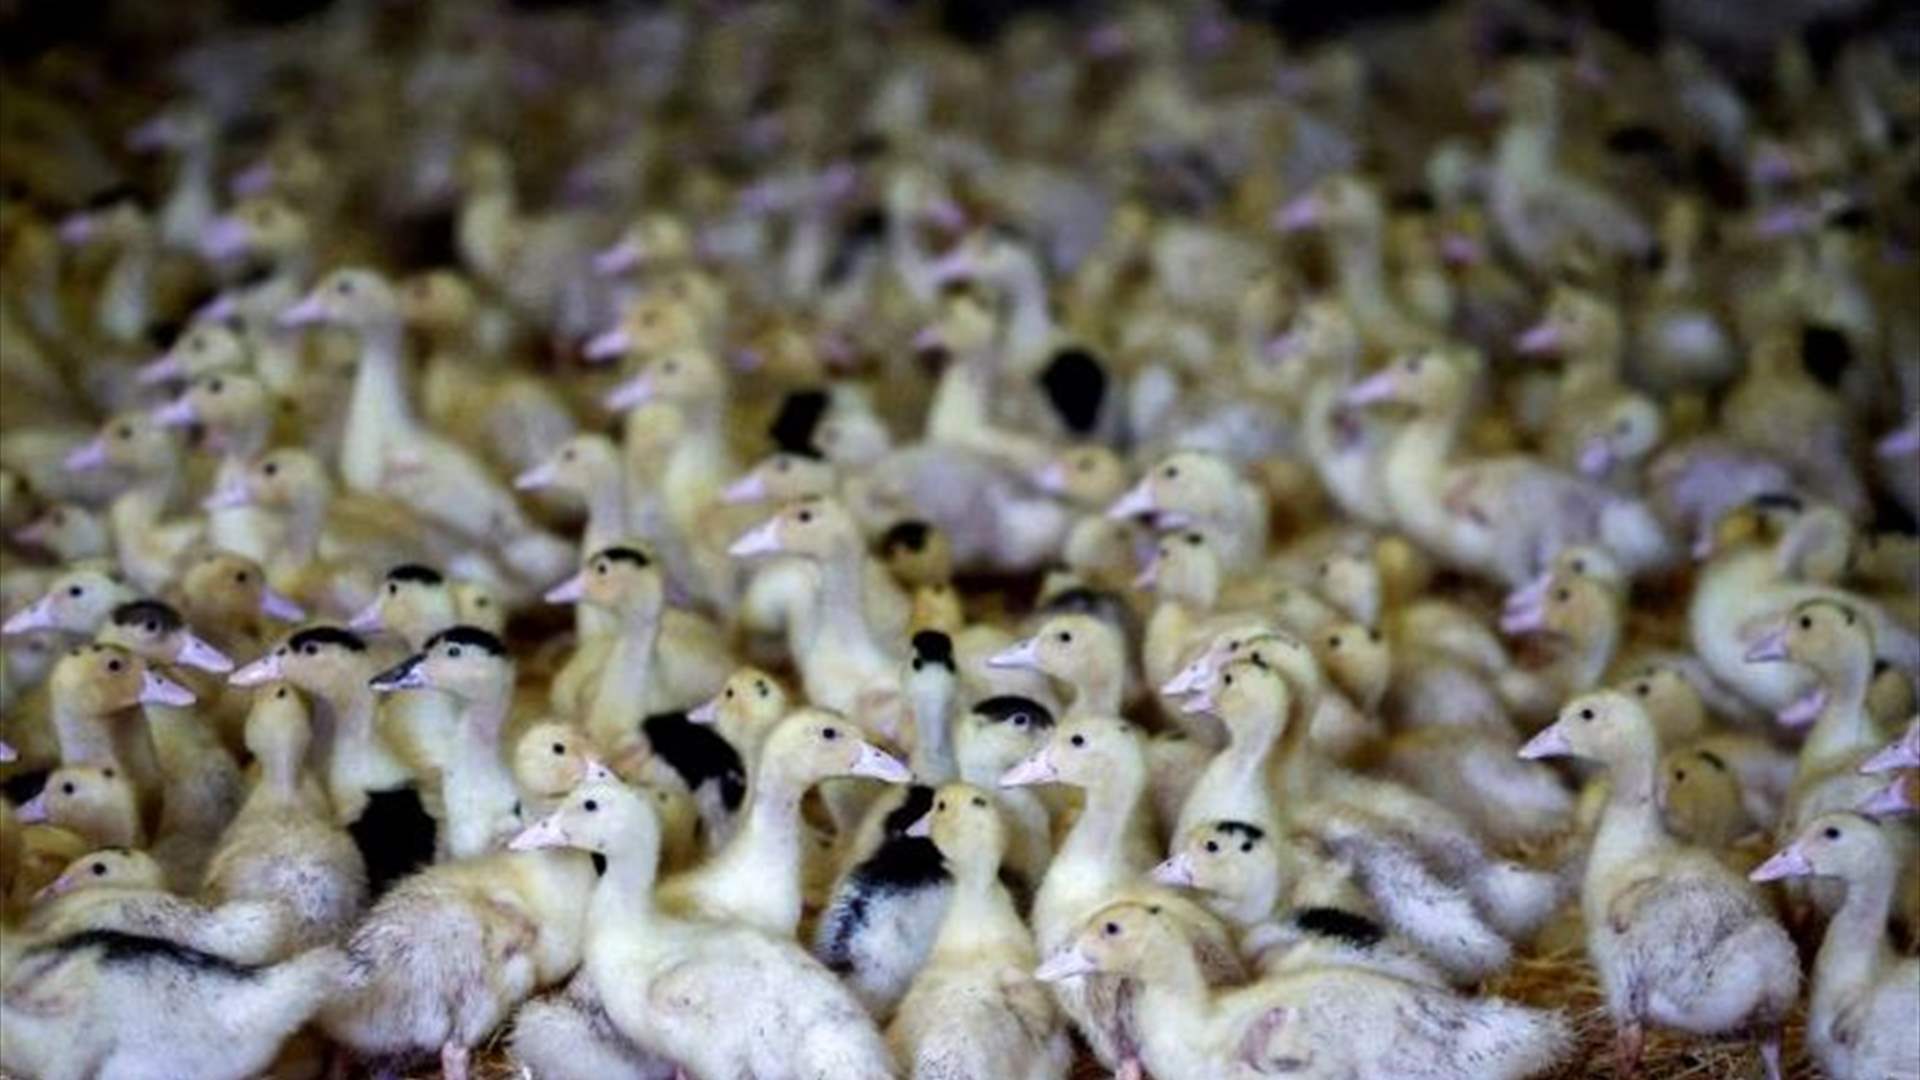 France confirms bird flu vaccination after favorable tests